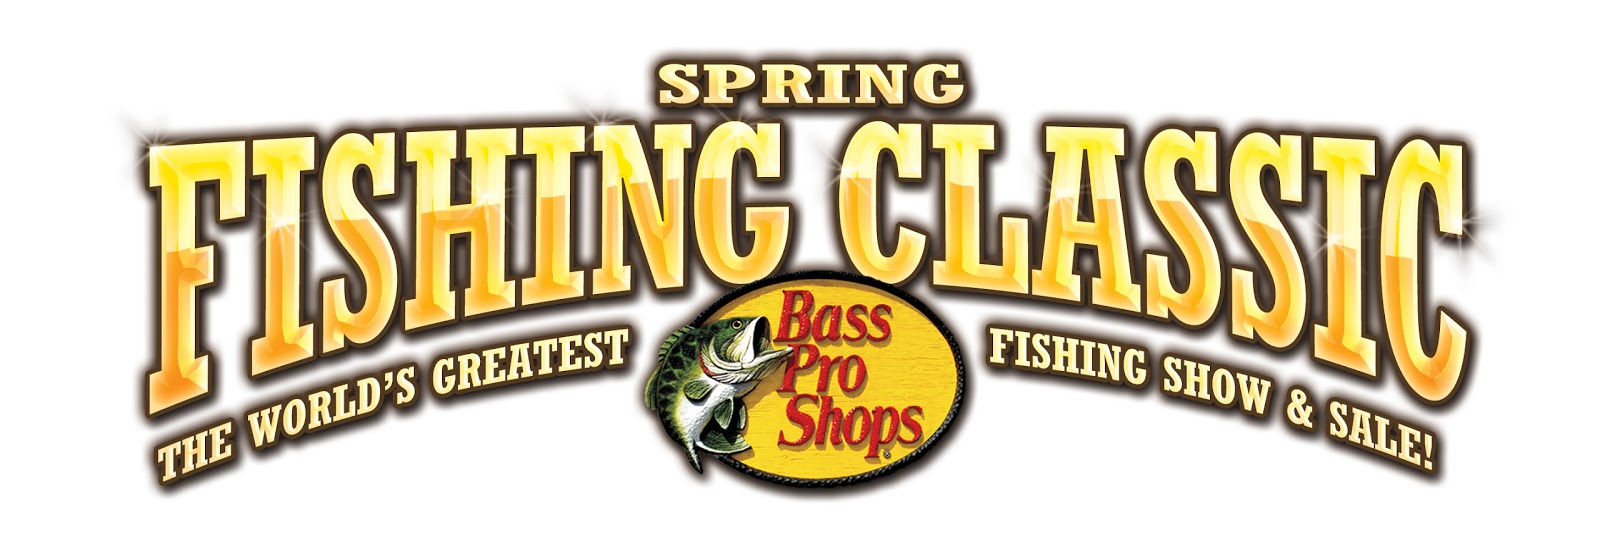 The Wild Side Bass Pro Shops Spring Fishing Classic is Fun for the